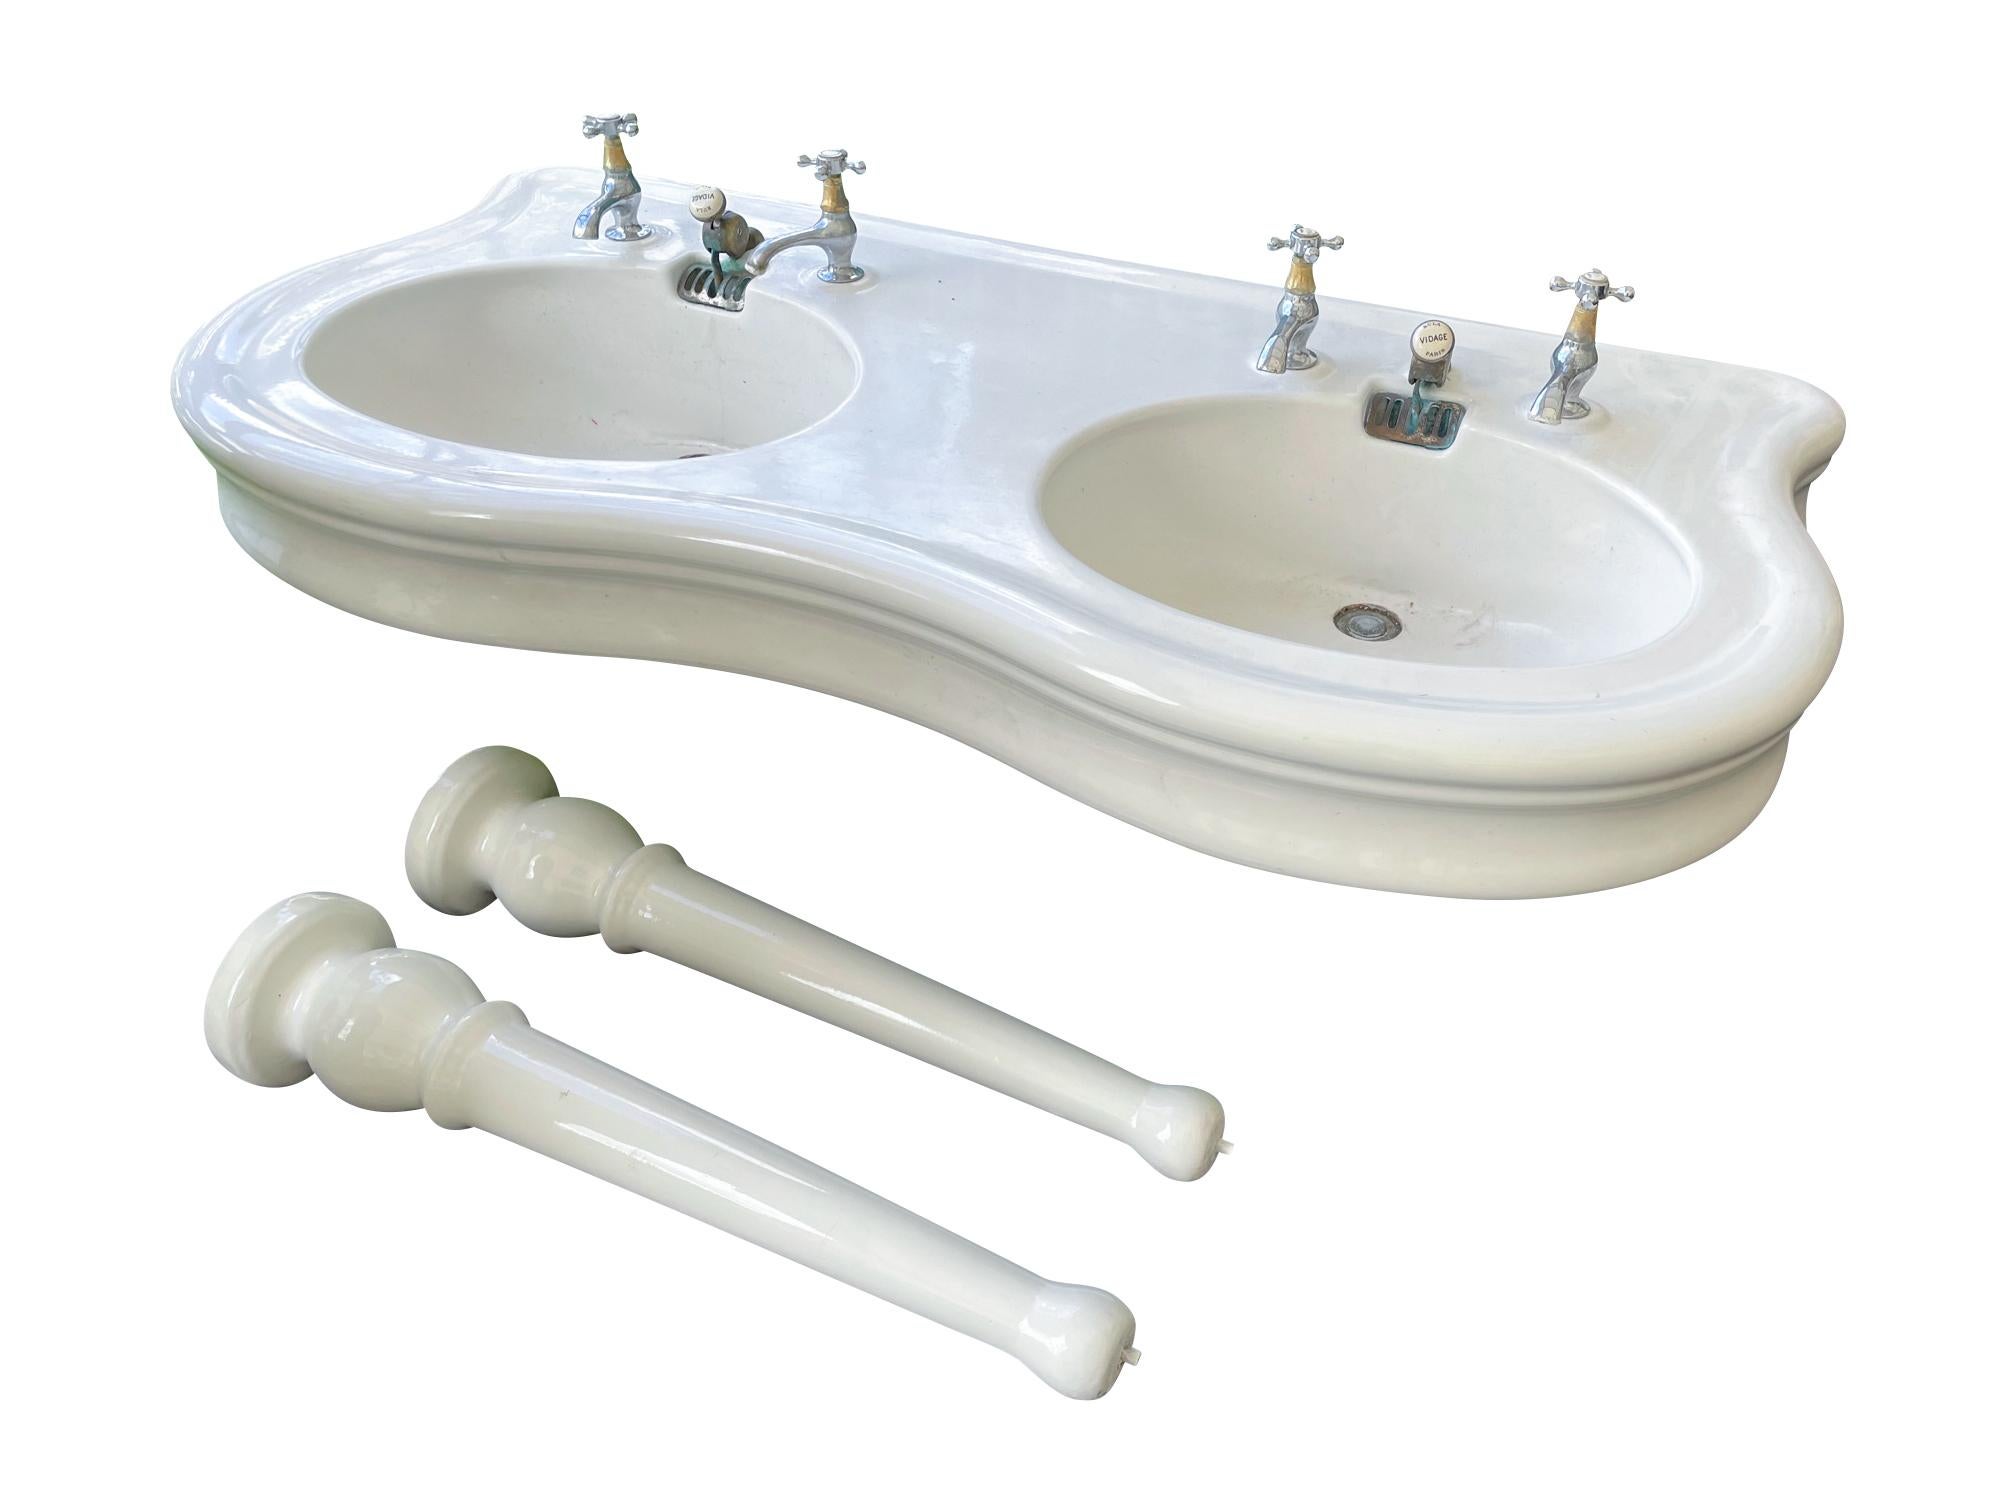 A fantastic double sink with column legs, in super condition for its age, circa 1910. Complete with original wastes, but with replacement taps, the taps are untested and could be ideally replaced with period examples, the wastes are untested and